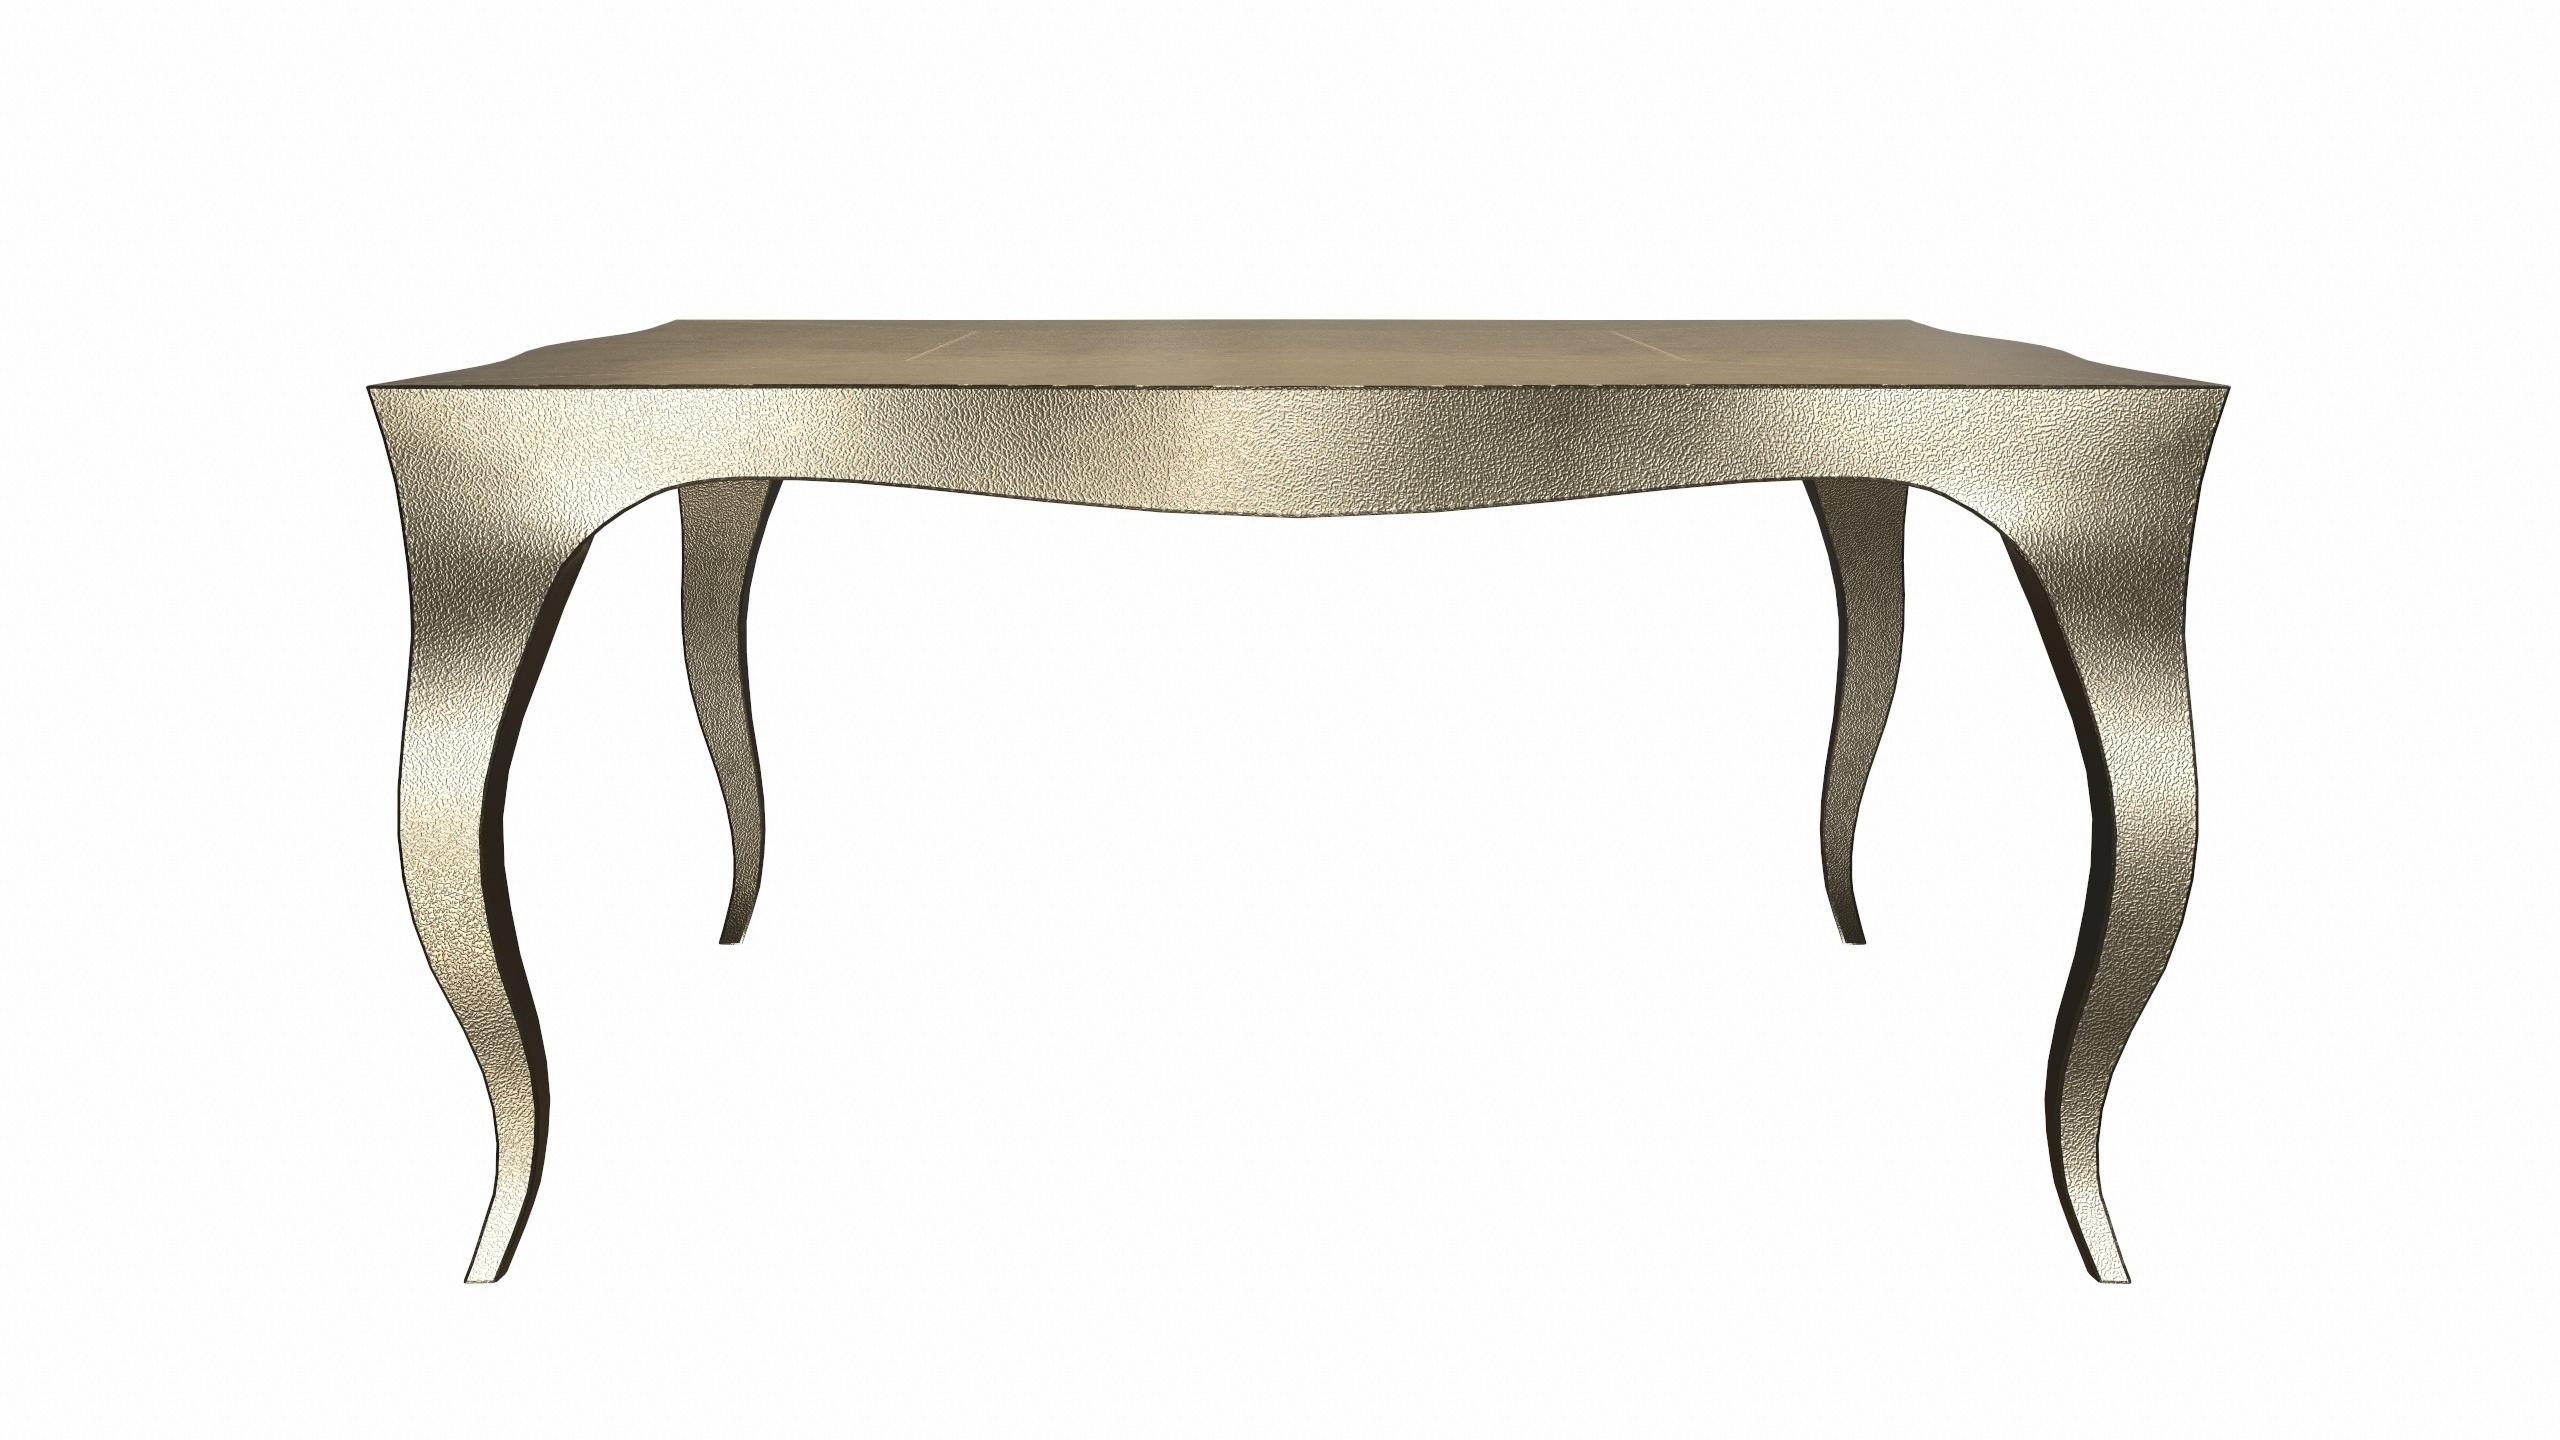 American Louise Art Deco Industrial and Work Tables Fine Hammered Brass 18.5x18.5x10 inch For Sale